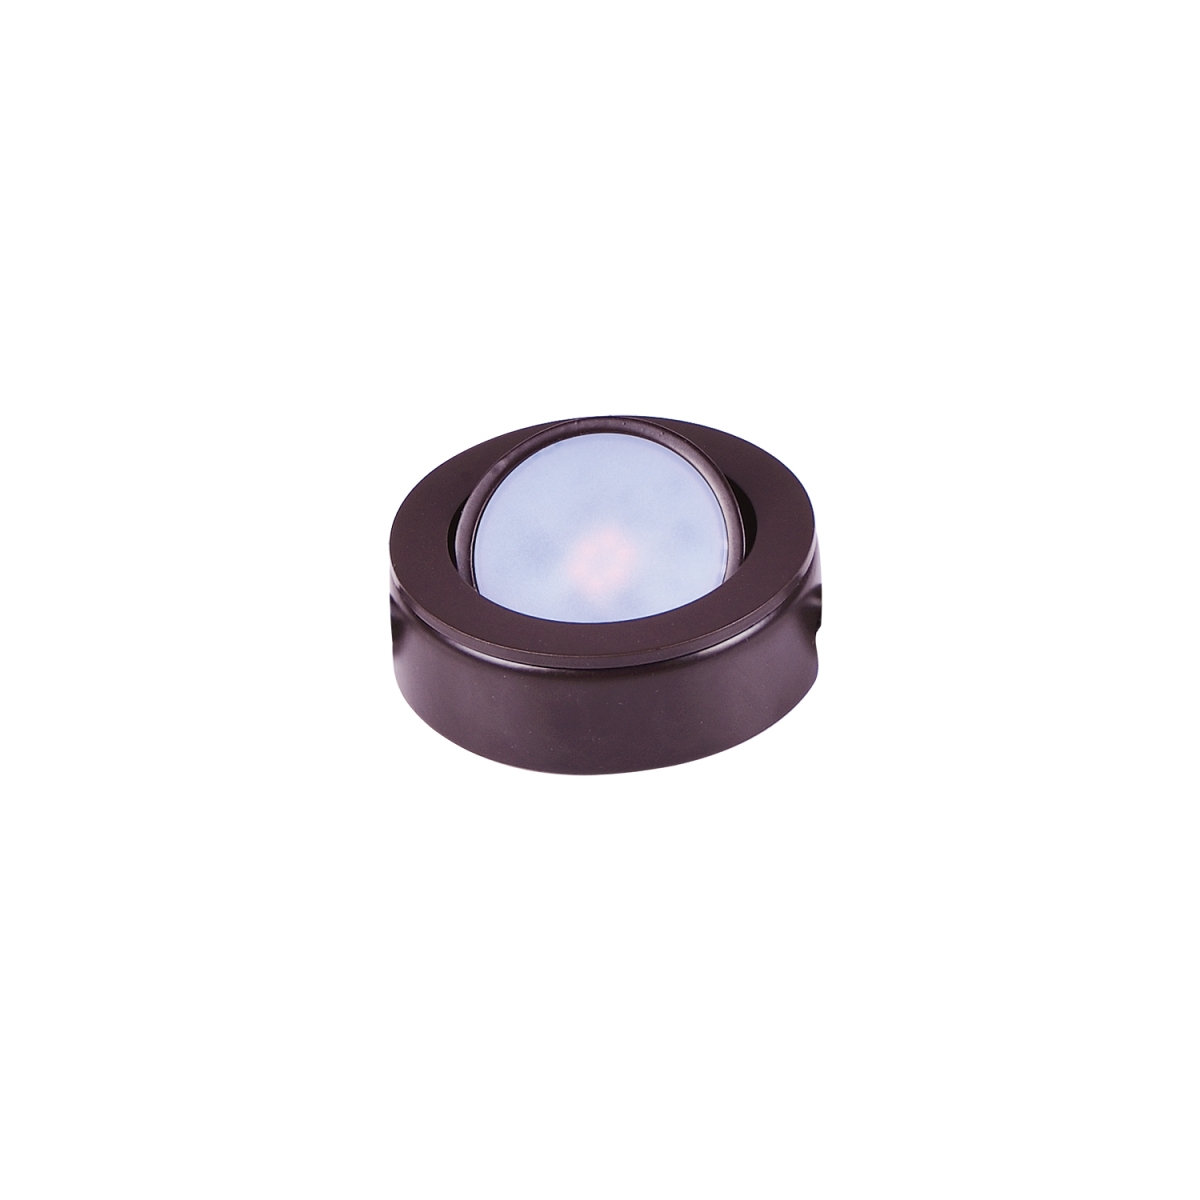 Picture of Maxim 53830BRZ Counter Max MX-LD-AC LED Puck 3000K Light, Anodized Bronze